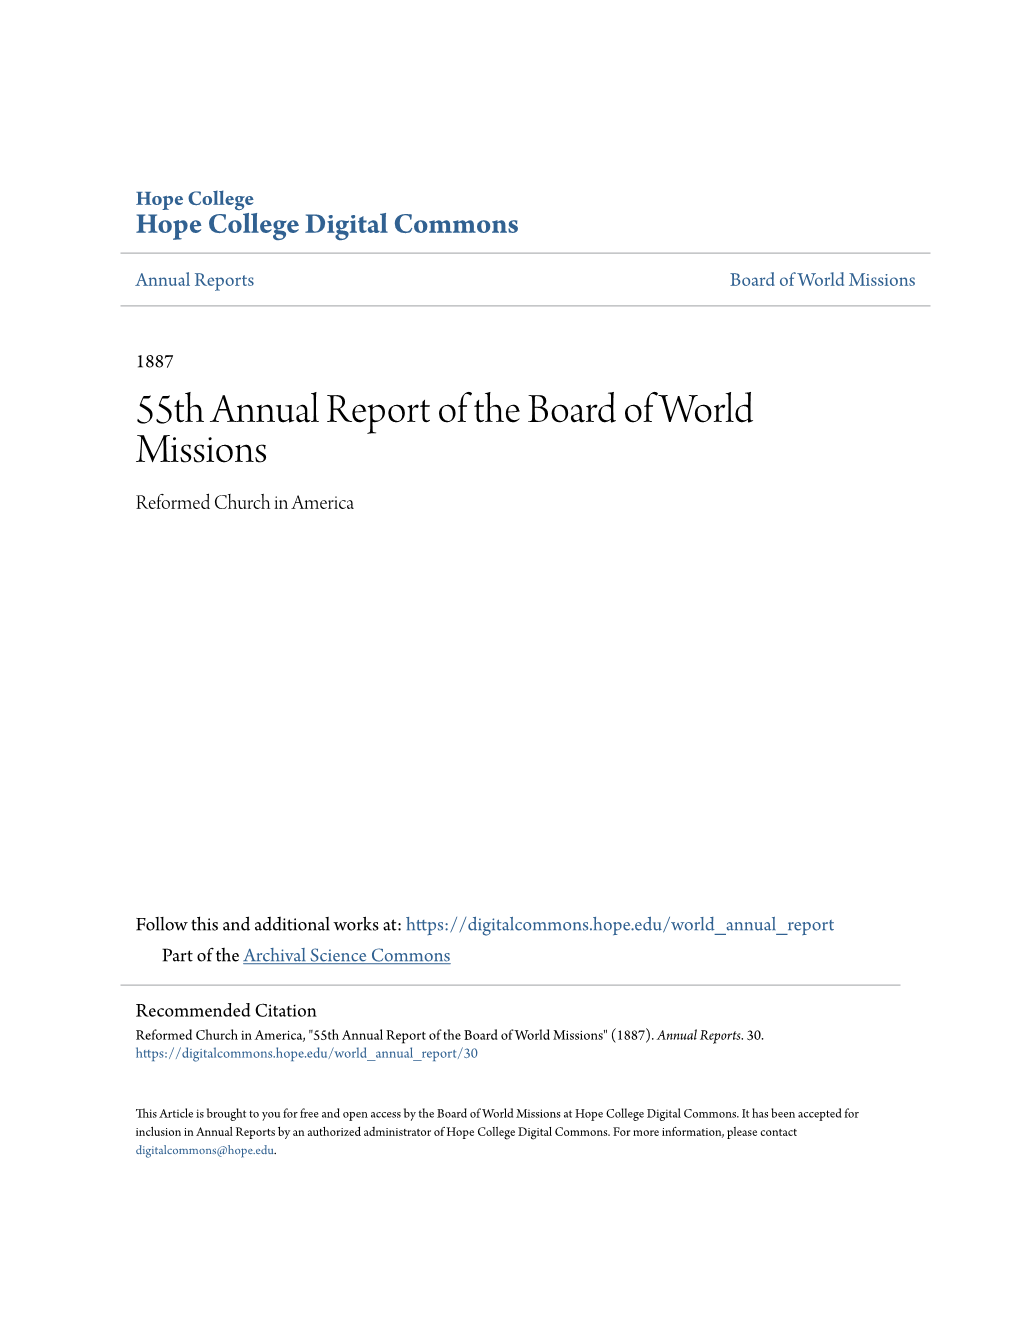 55Th Annual Report of the Board of World Missions Reformed Church in America